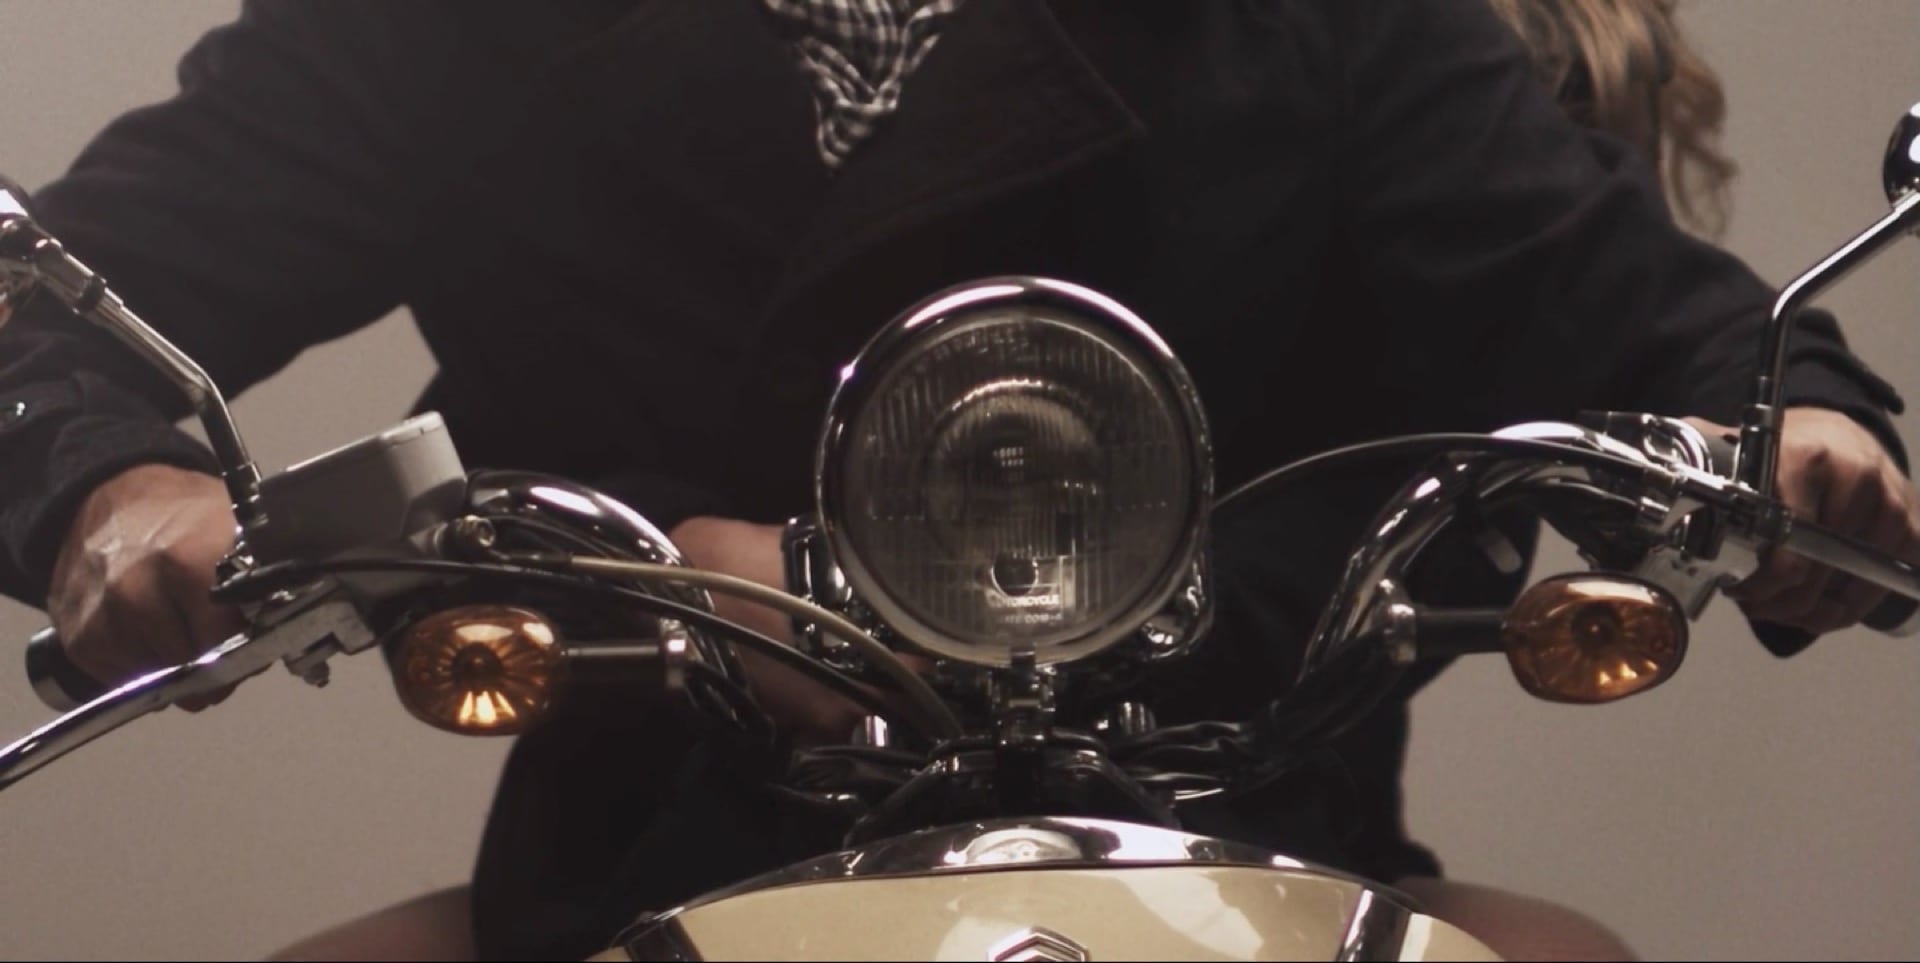 Closeup scene of front of old motorcycle from Classic: Sara Bost + Zach Miller